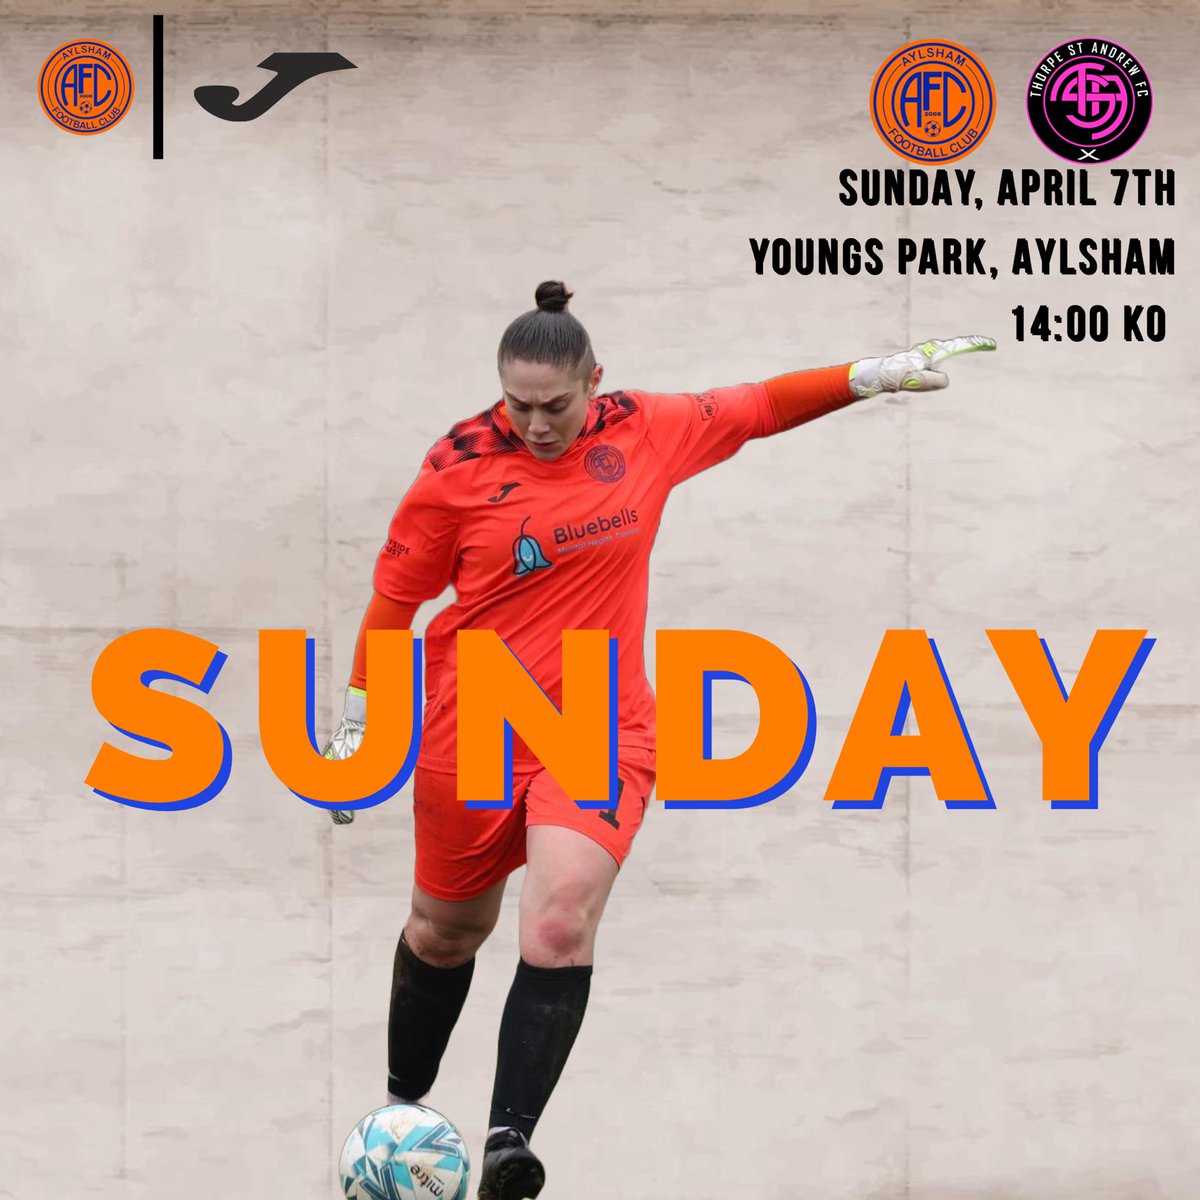 🅂 🅄 🄽 🄳 🄰 🅈 We now look to turn our attentions to Sunday, where we will host @TSAFC_WG at 🏠 We look to rebuild and grow from the positives from yesterday’s game. 🆚 - @TSAFC_WG 📍 - Youngs Park, Aylsham ⌚️ - 14:00pm KO 🟠🔵